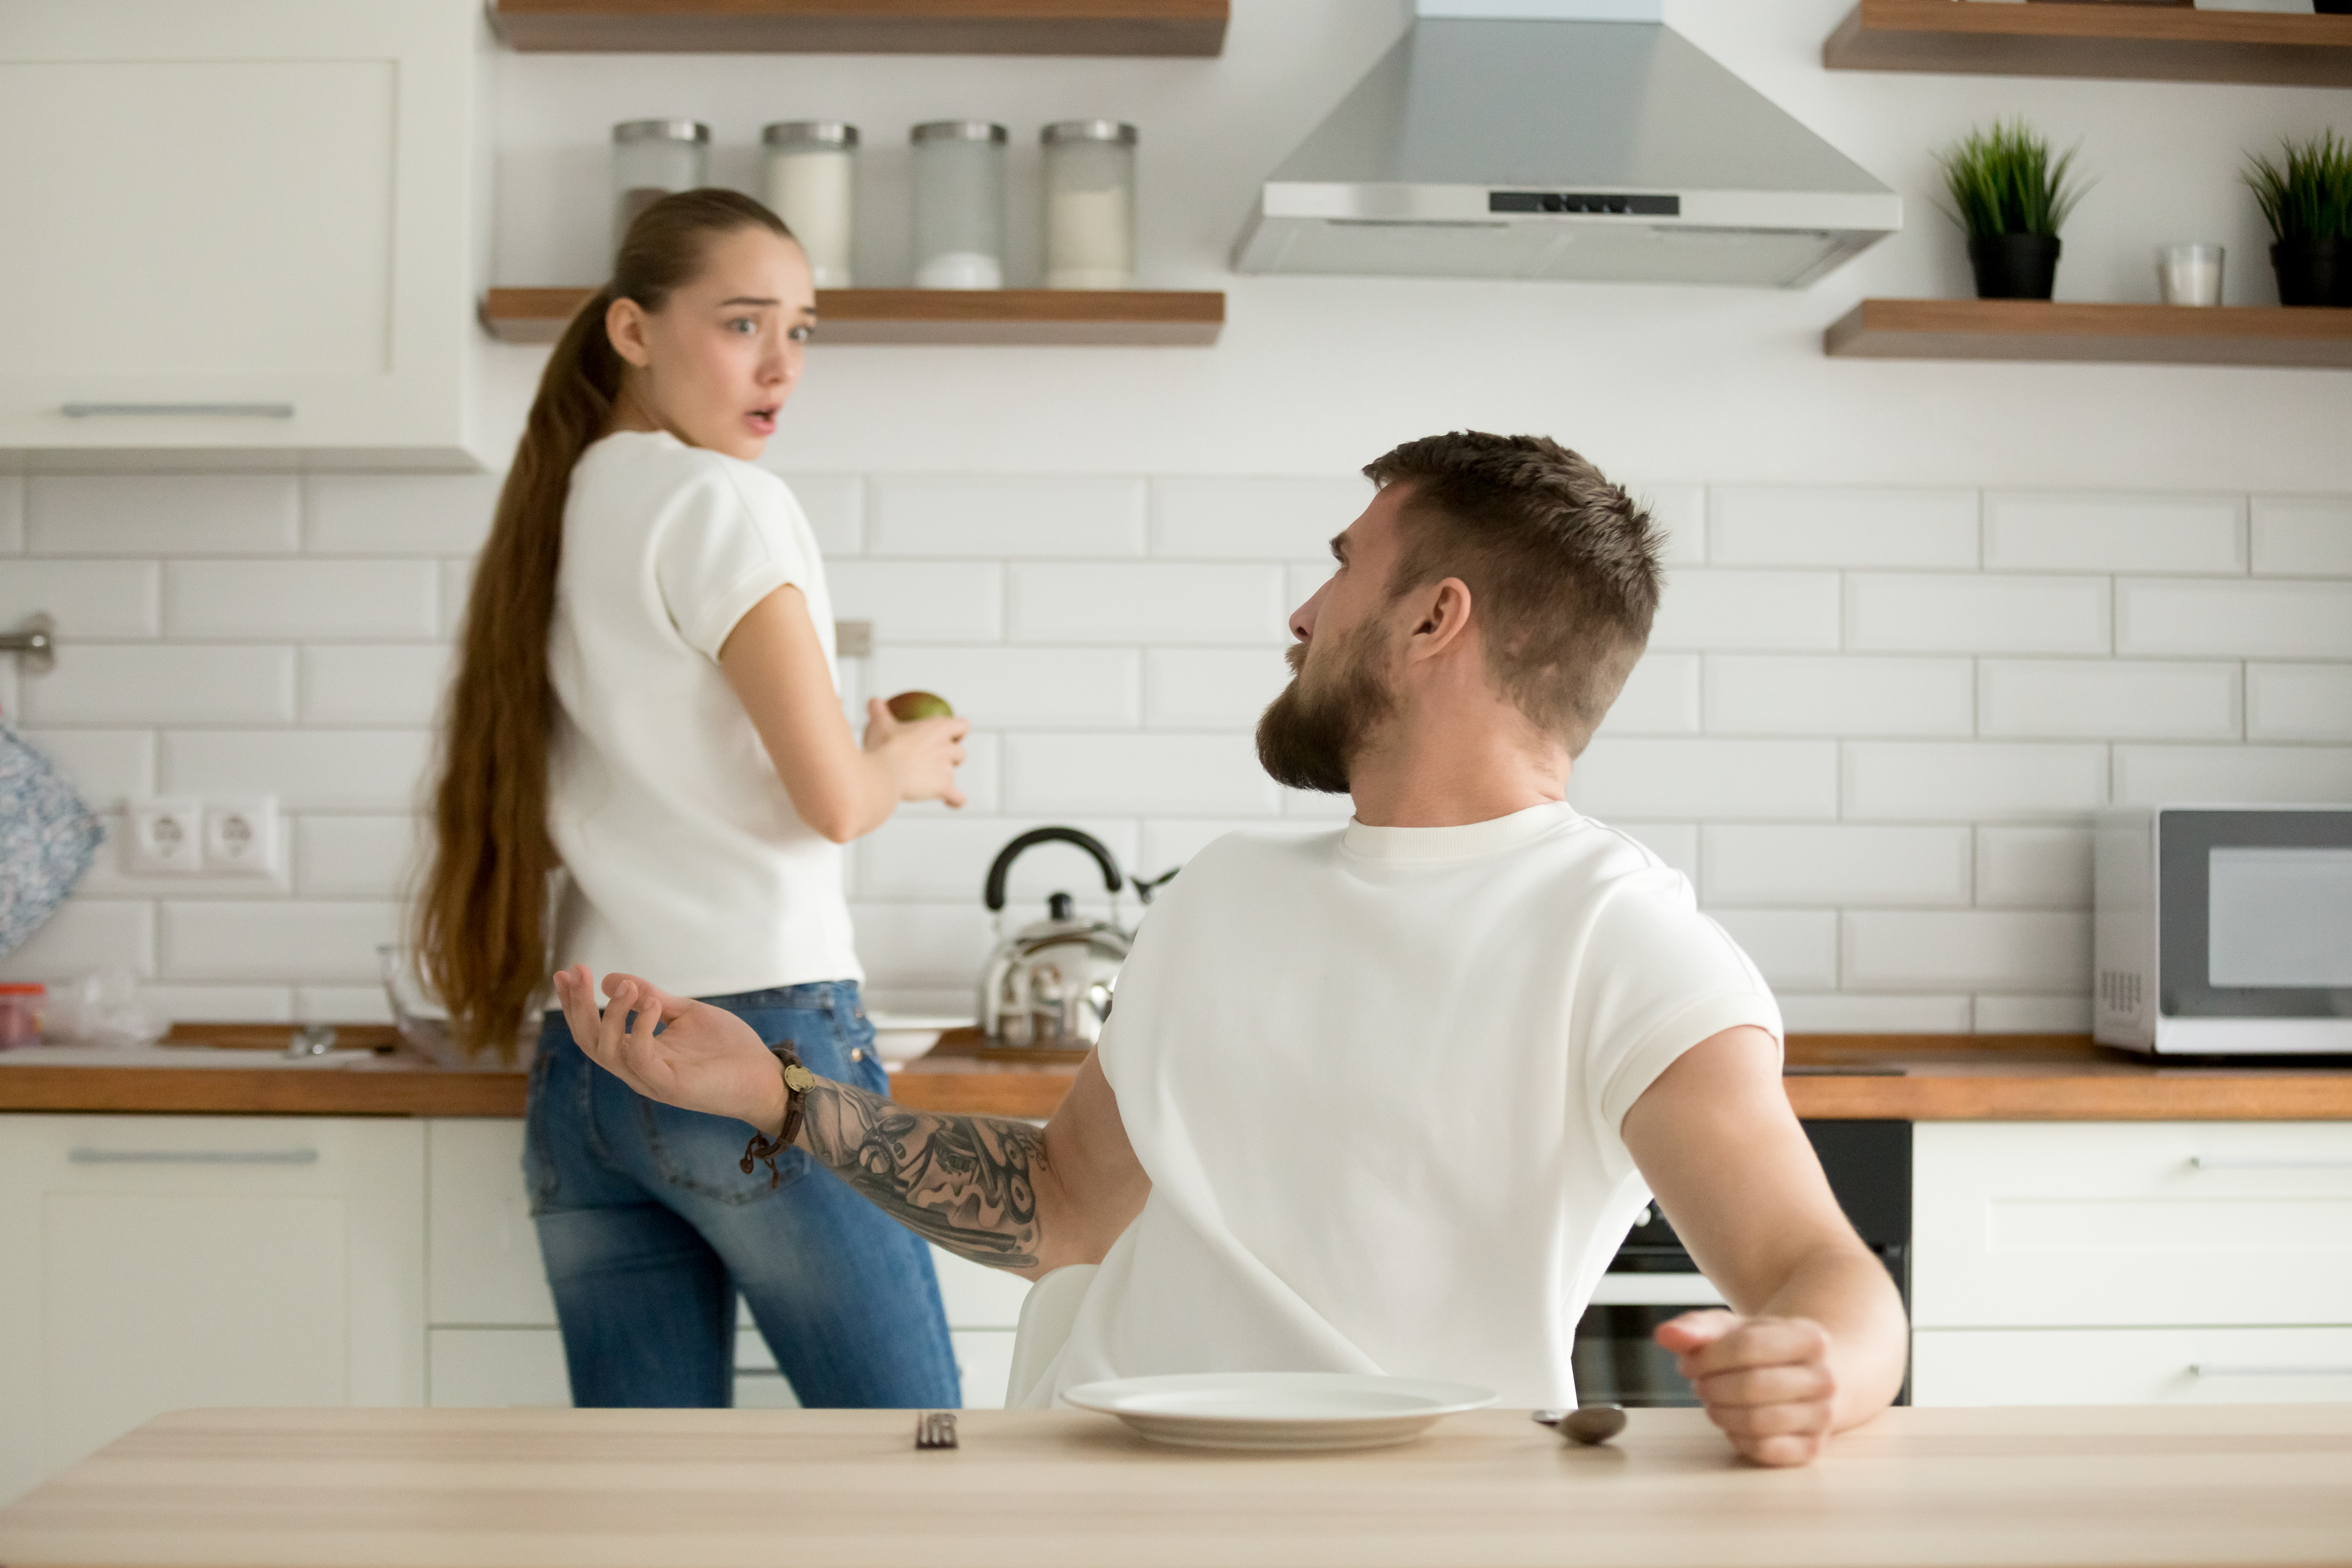 Angry husband and shocked wife arguing having conflict in kitche | Source: Getty Images